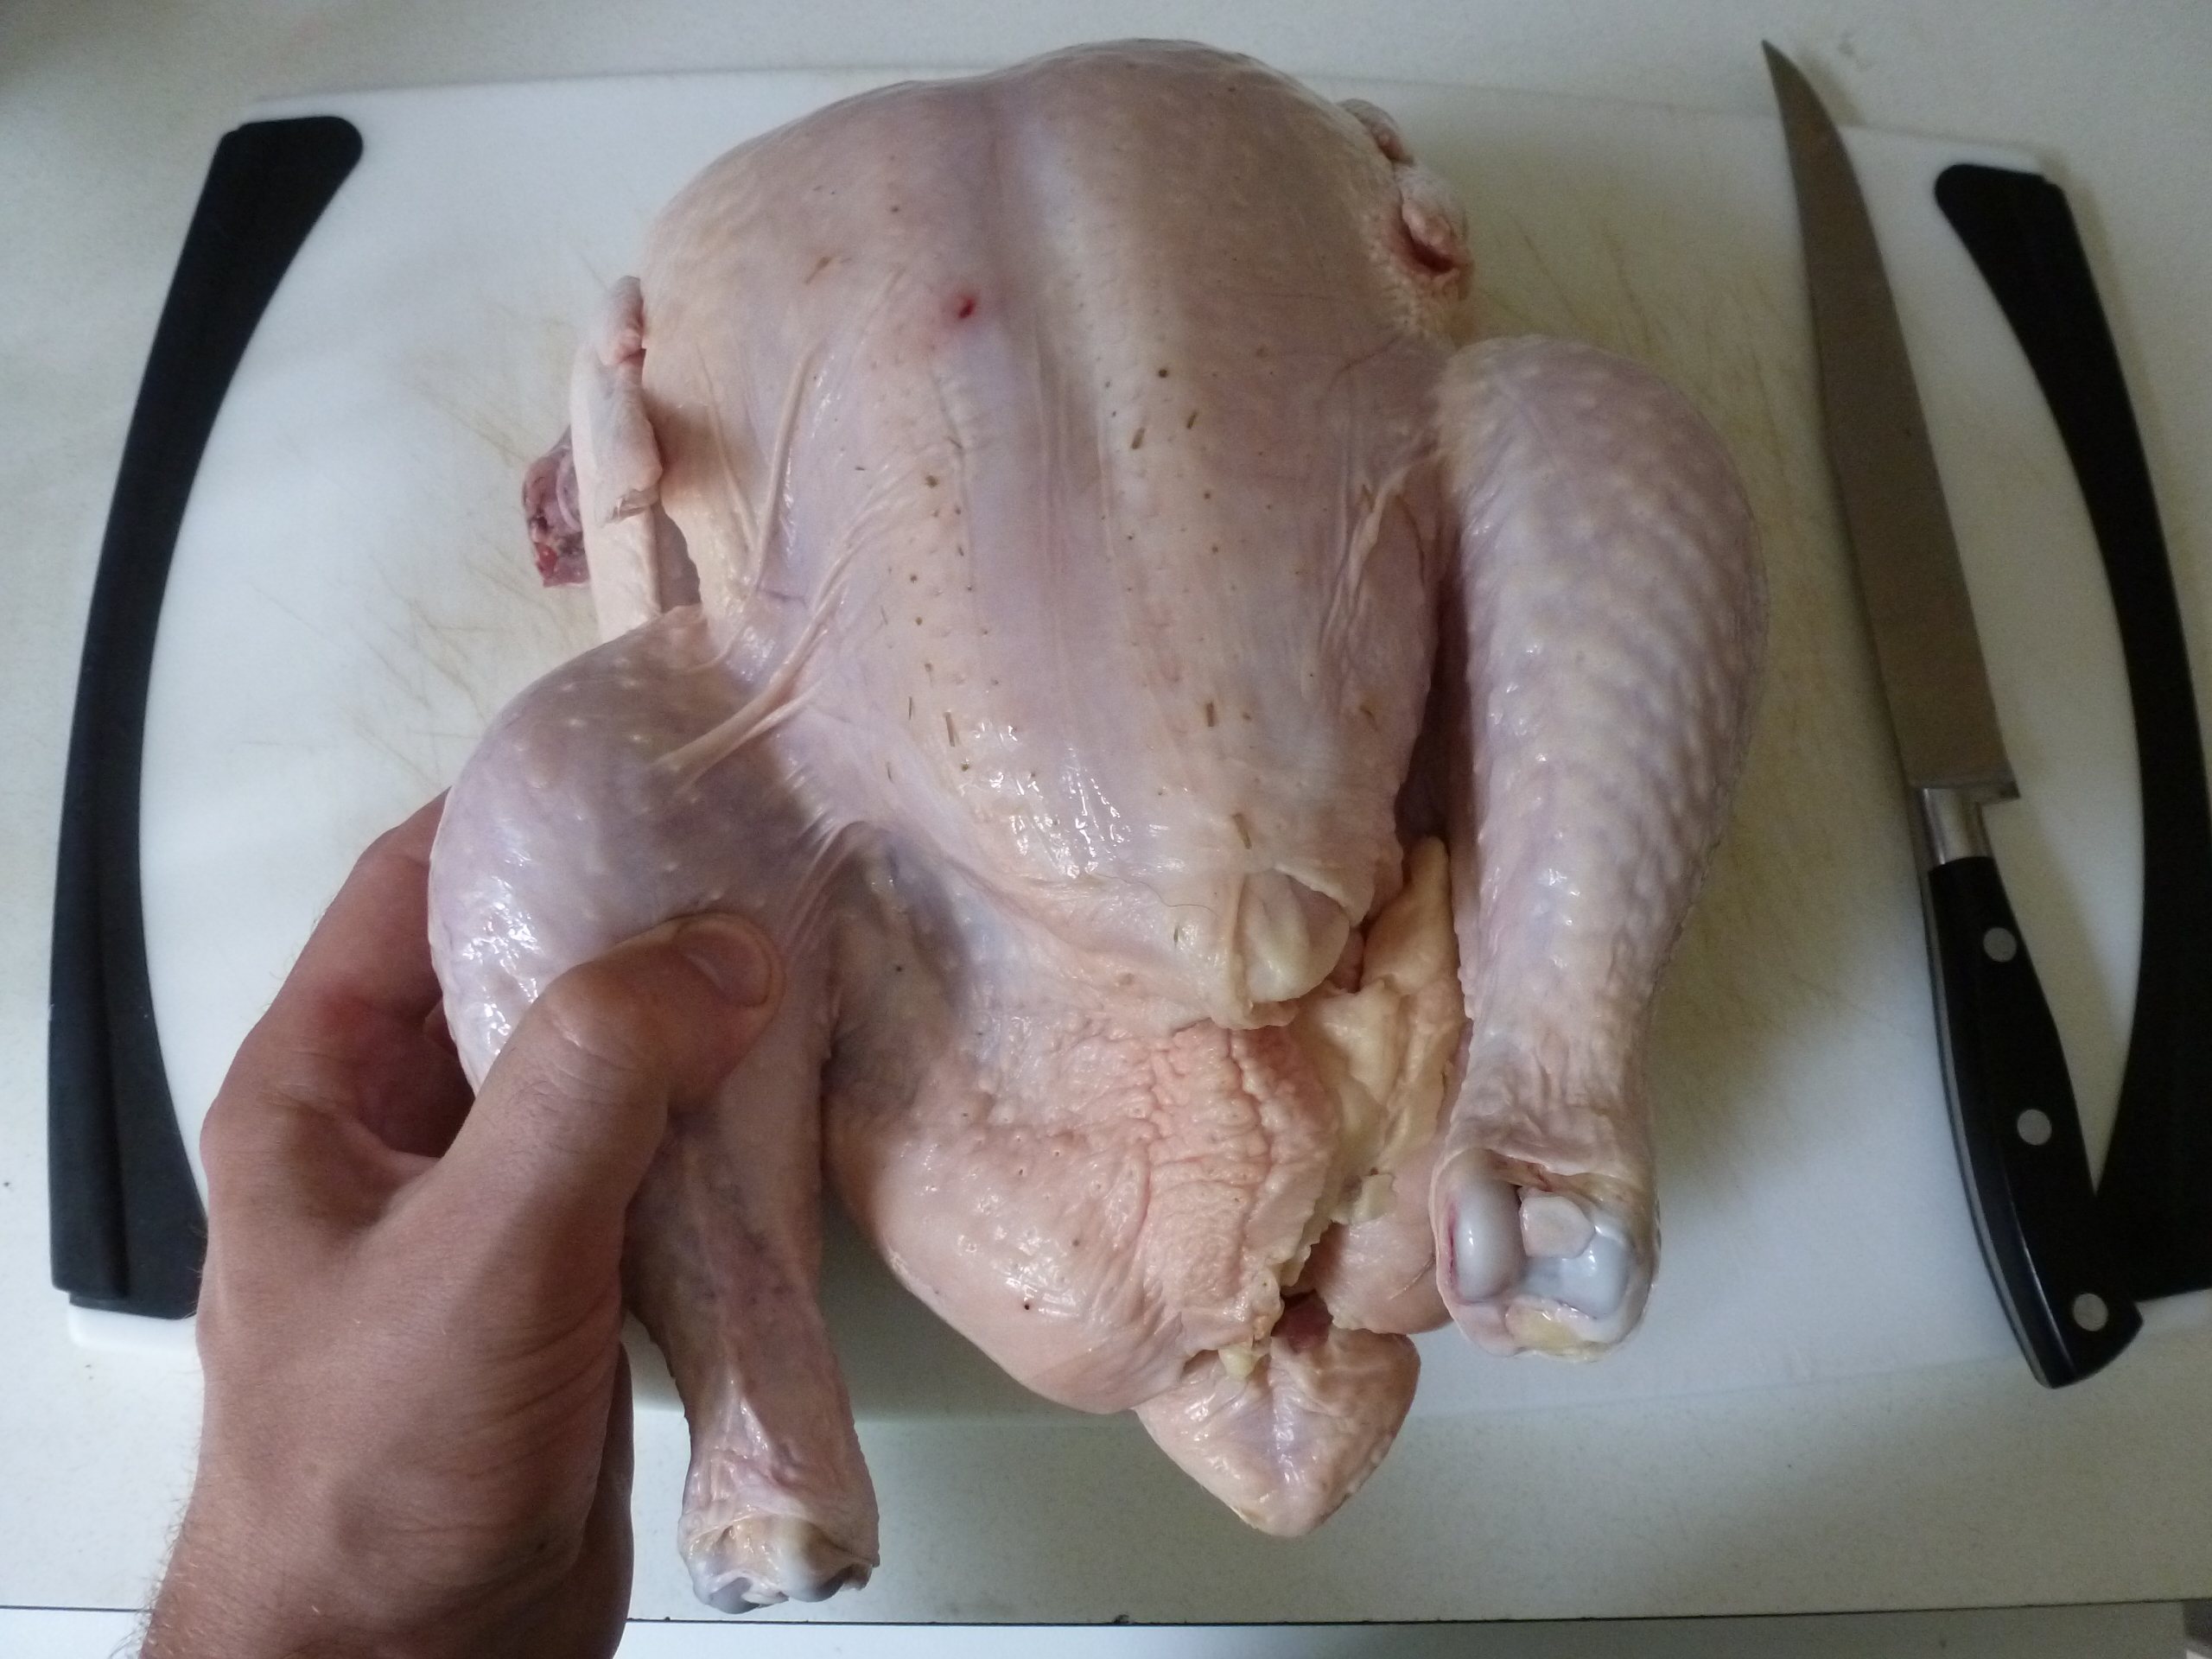 Pulling the leg away from the body of the chicken